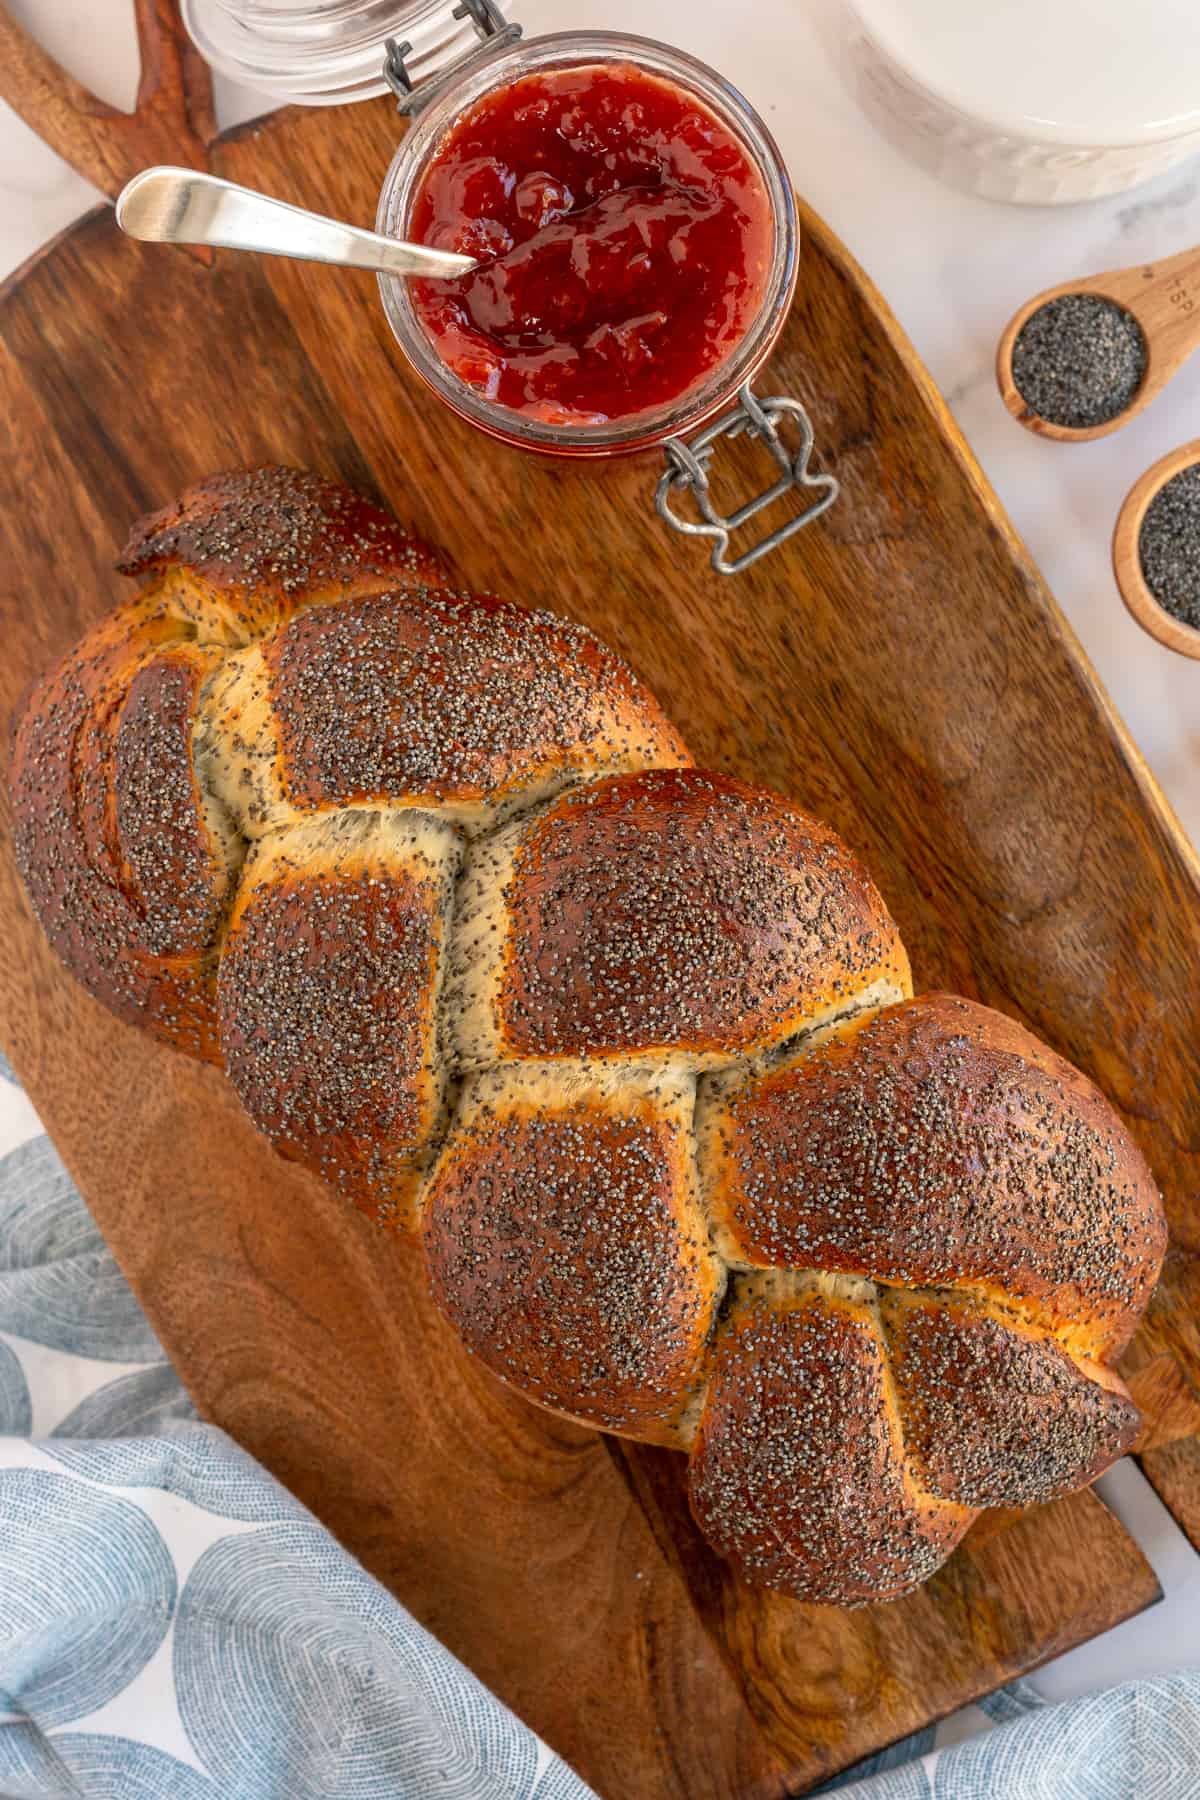 baked braided bread on a board with jam